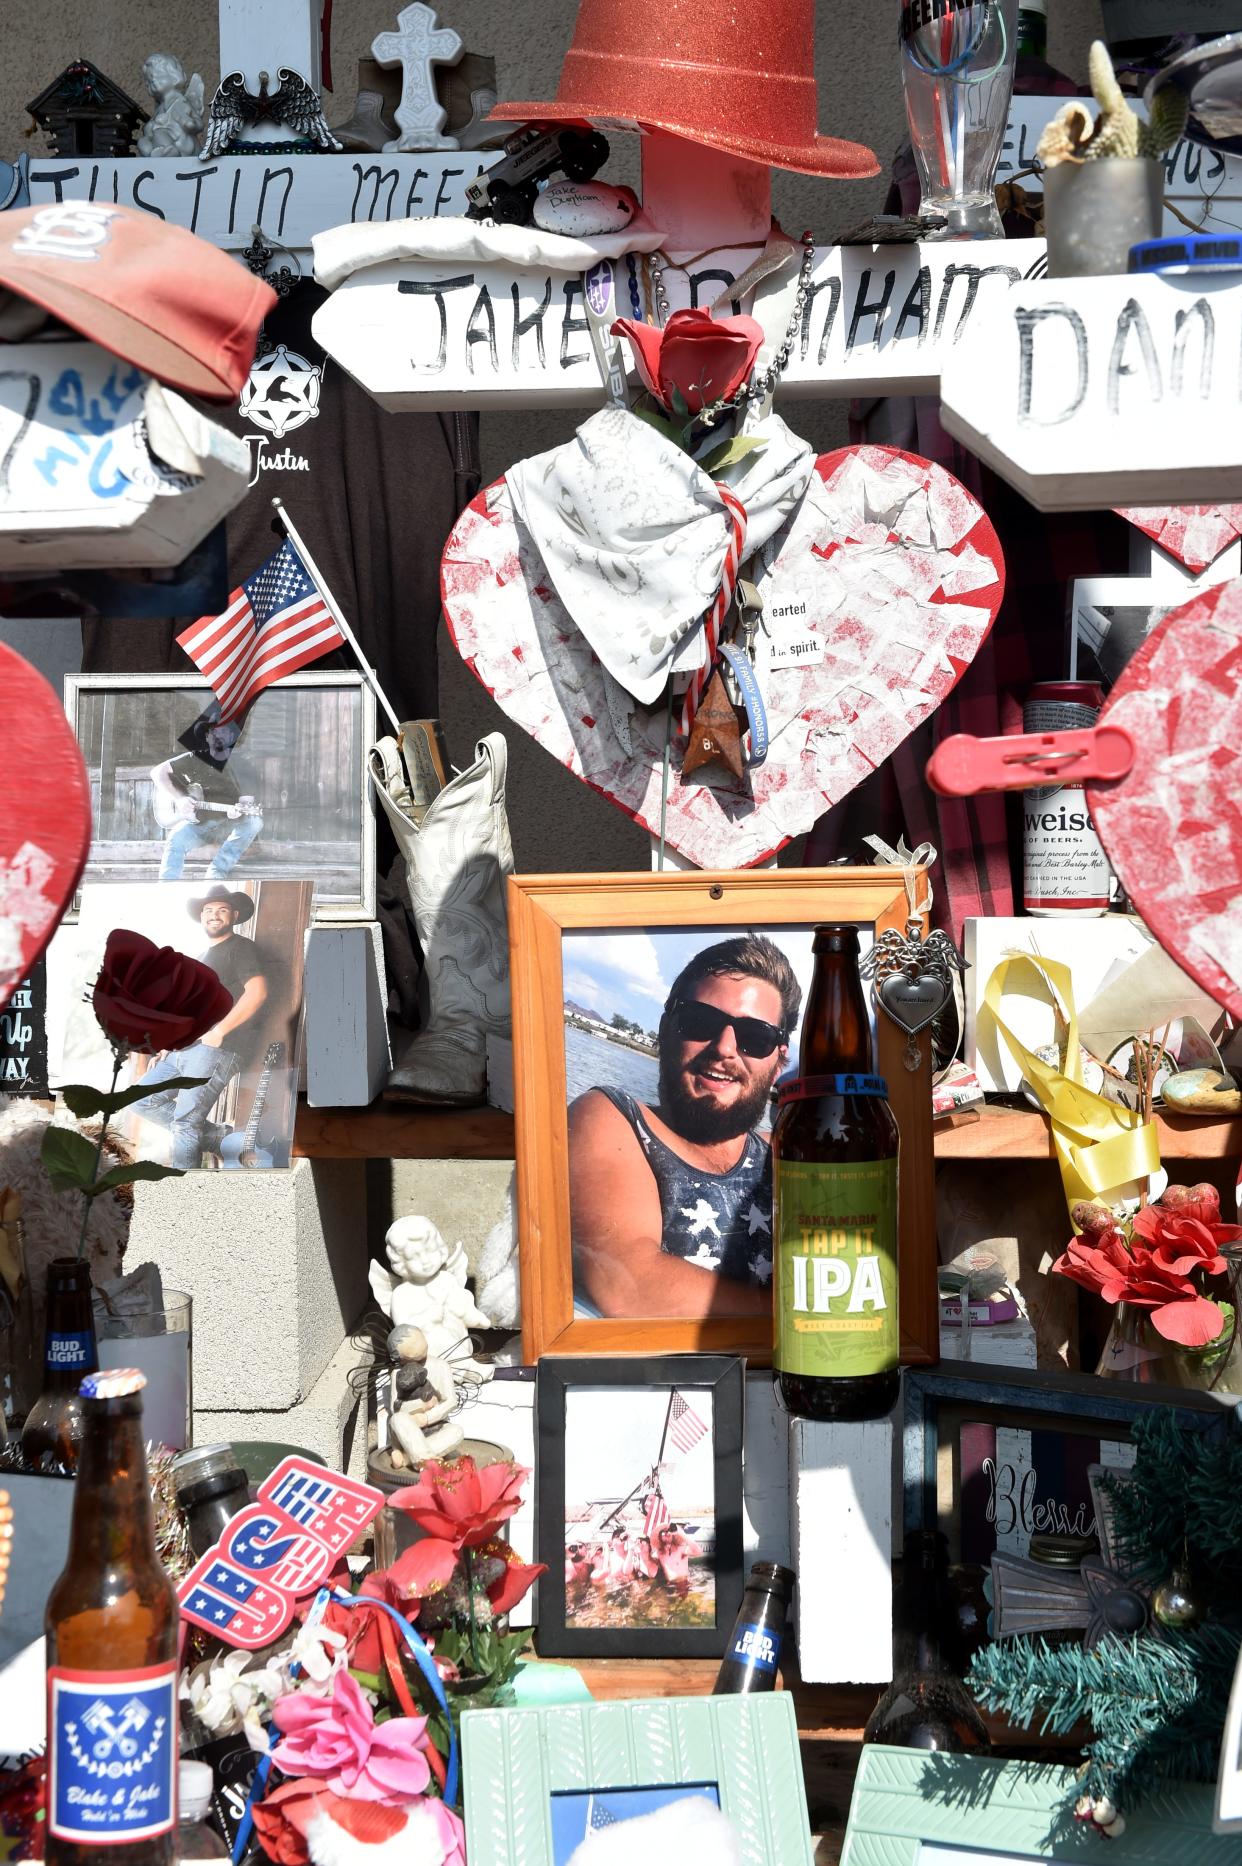 A memorial outside the Borderline Bar & Grill shooting shown in 2020 in Thousand Oaks shows victim Jake Dunham, and 11 others who were killed in a mass shooting on Nov. 7, 2018.